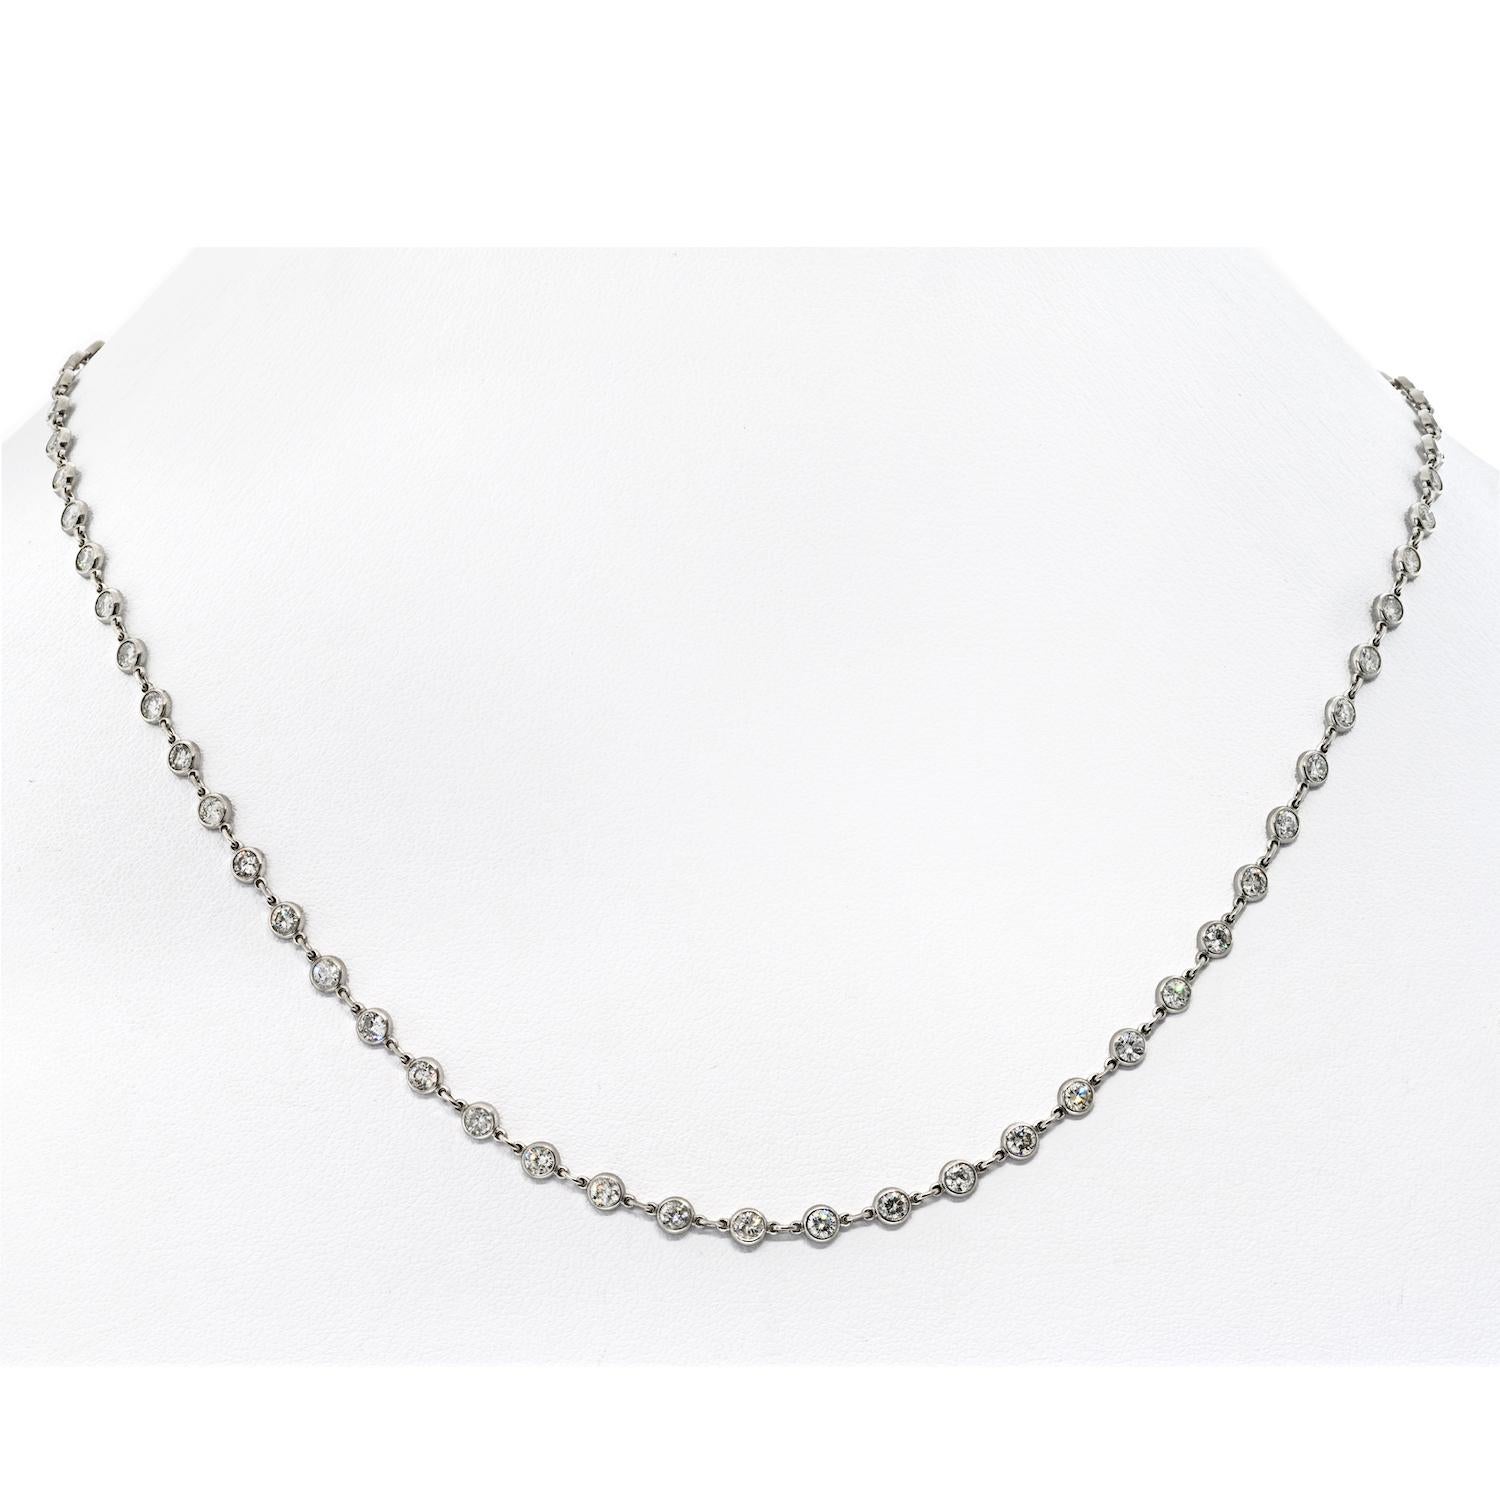 Introducing a truly enchanting piece of jewelry – the Beautiful Handmade Diamond by the Yard Necklace in 18K White Gold. 

This exquisite necklace features a remarkable 6.17 carats of natural round brilliant-cut diamonds, each hand-set in radiant